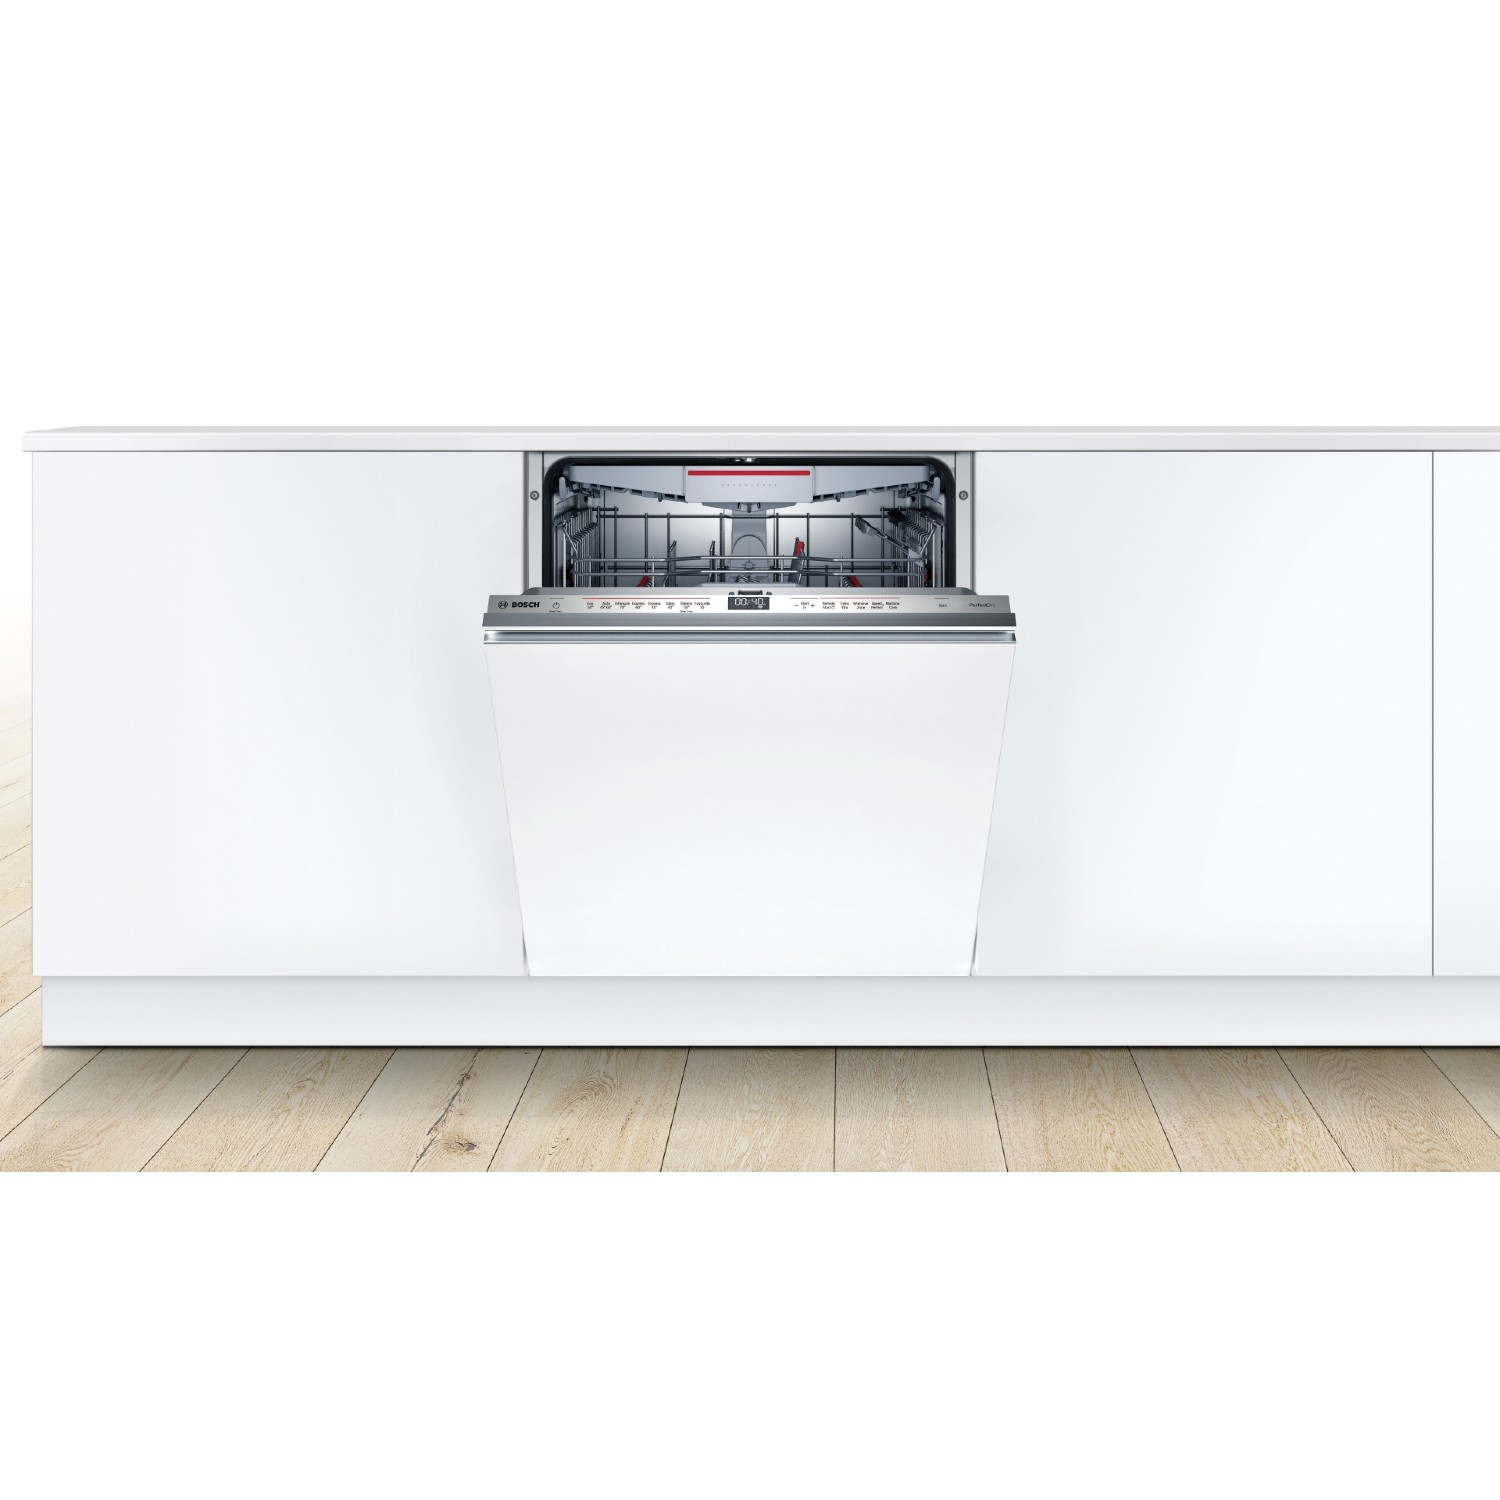 Bosch SMD6ZCX60G Integrated Full Size Dishwasher - 13 Place Settings - 7